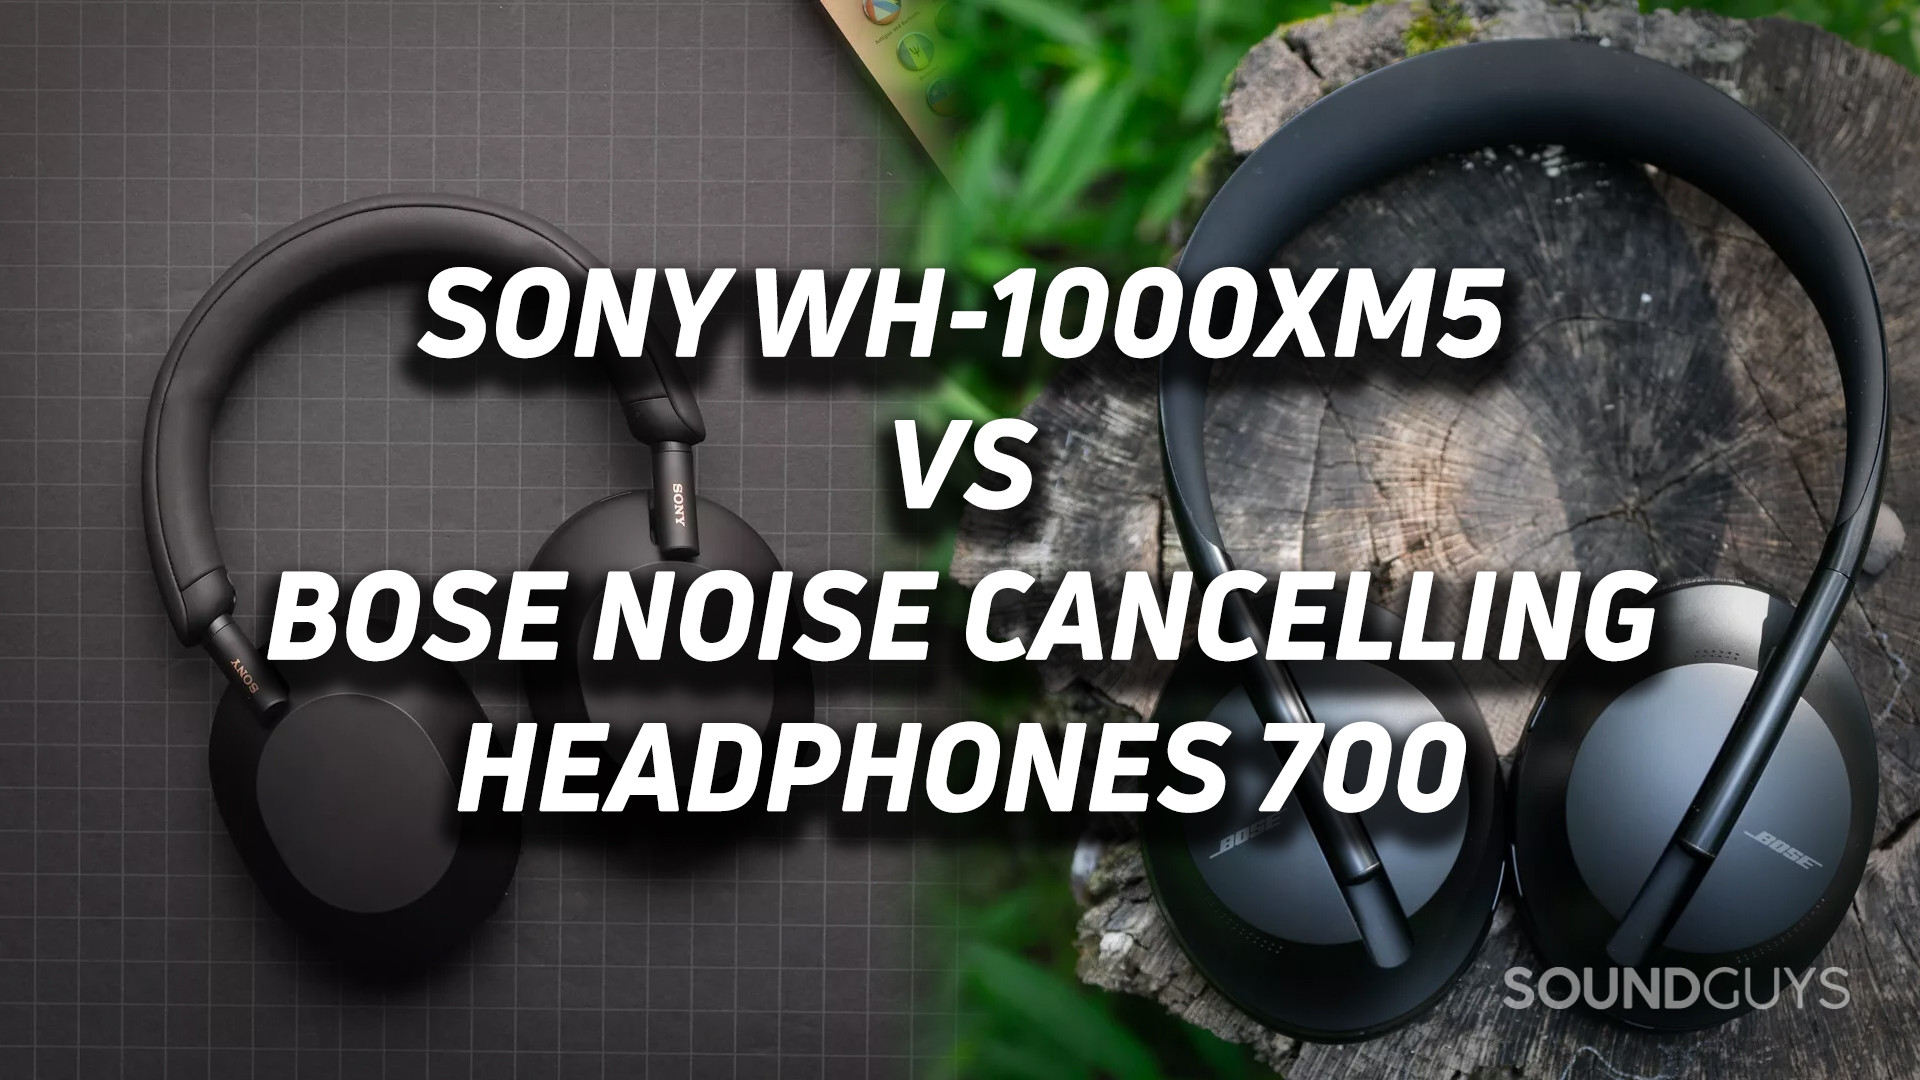 Sony WH-1000XM5 headphones review: Still the ANC king of premium